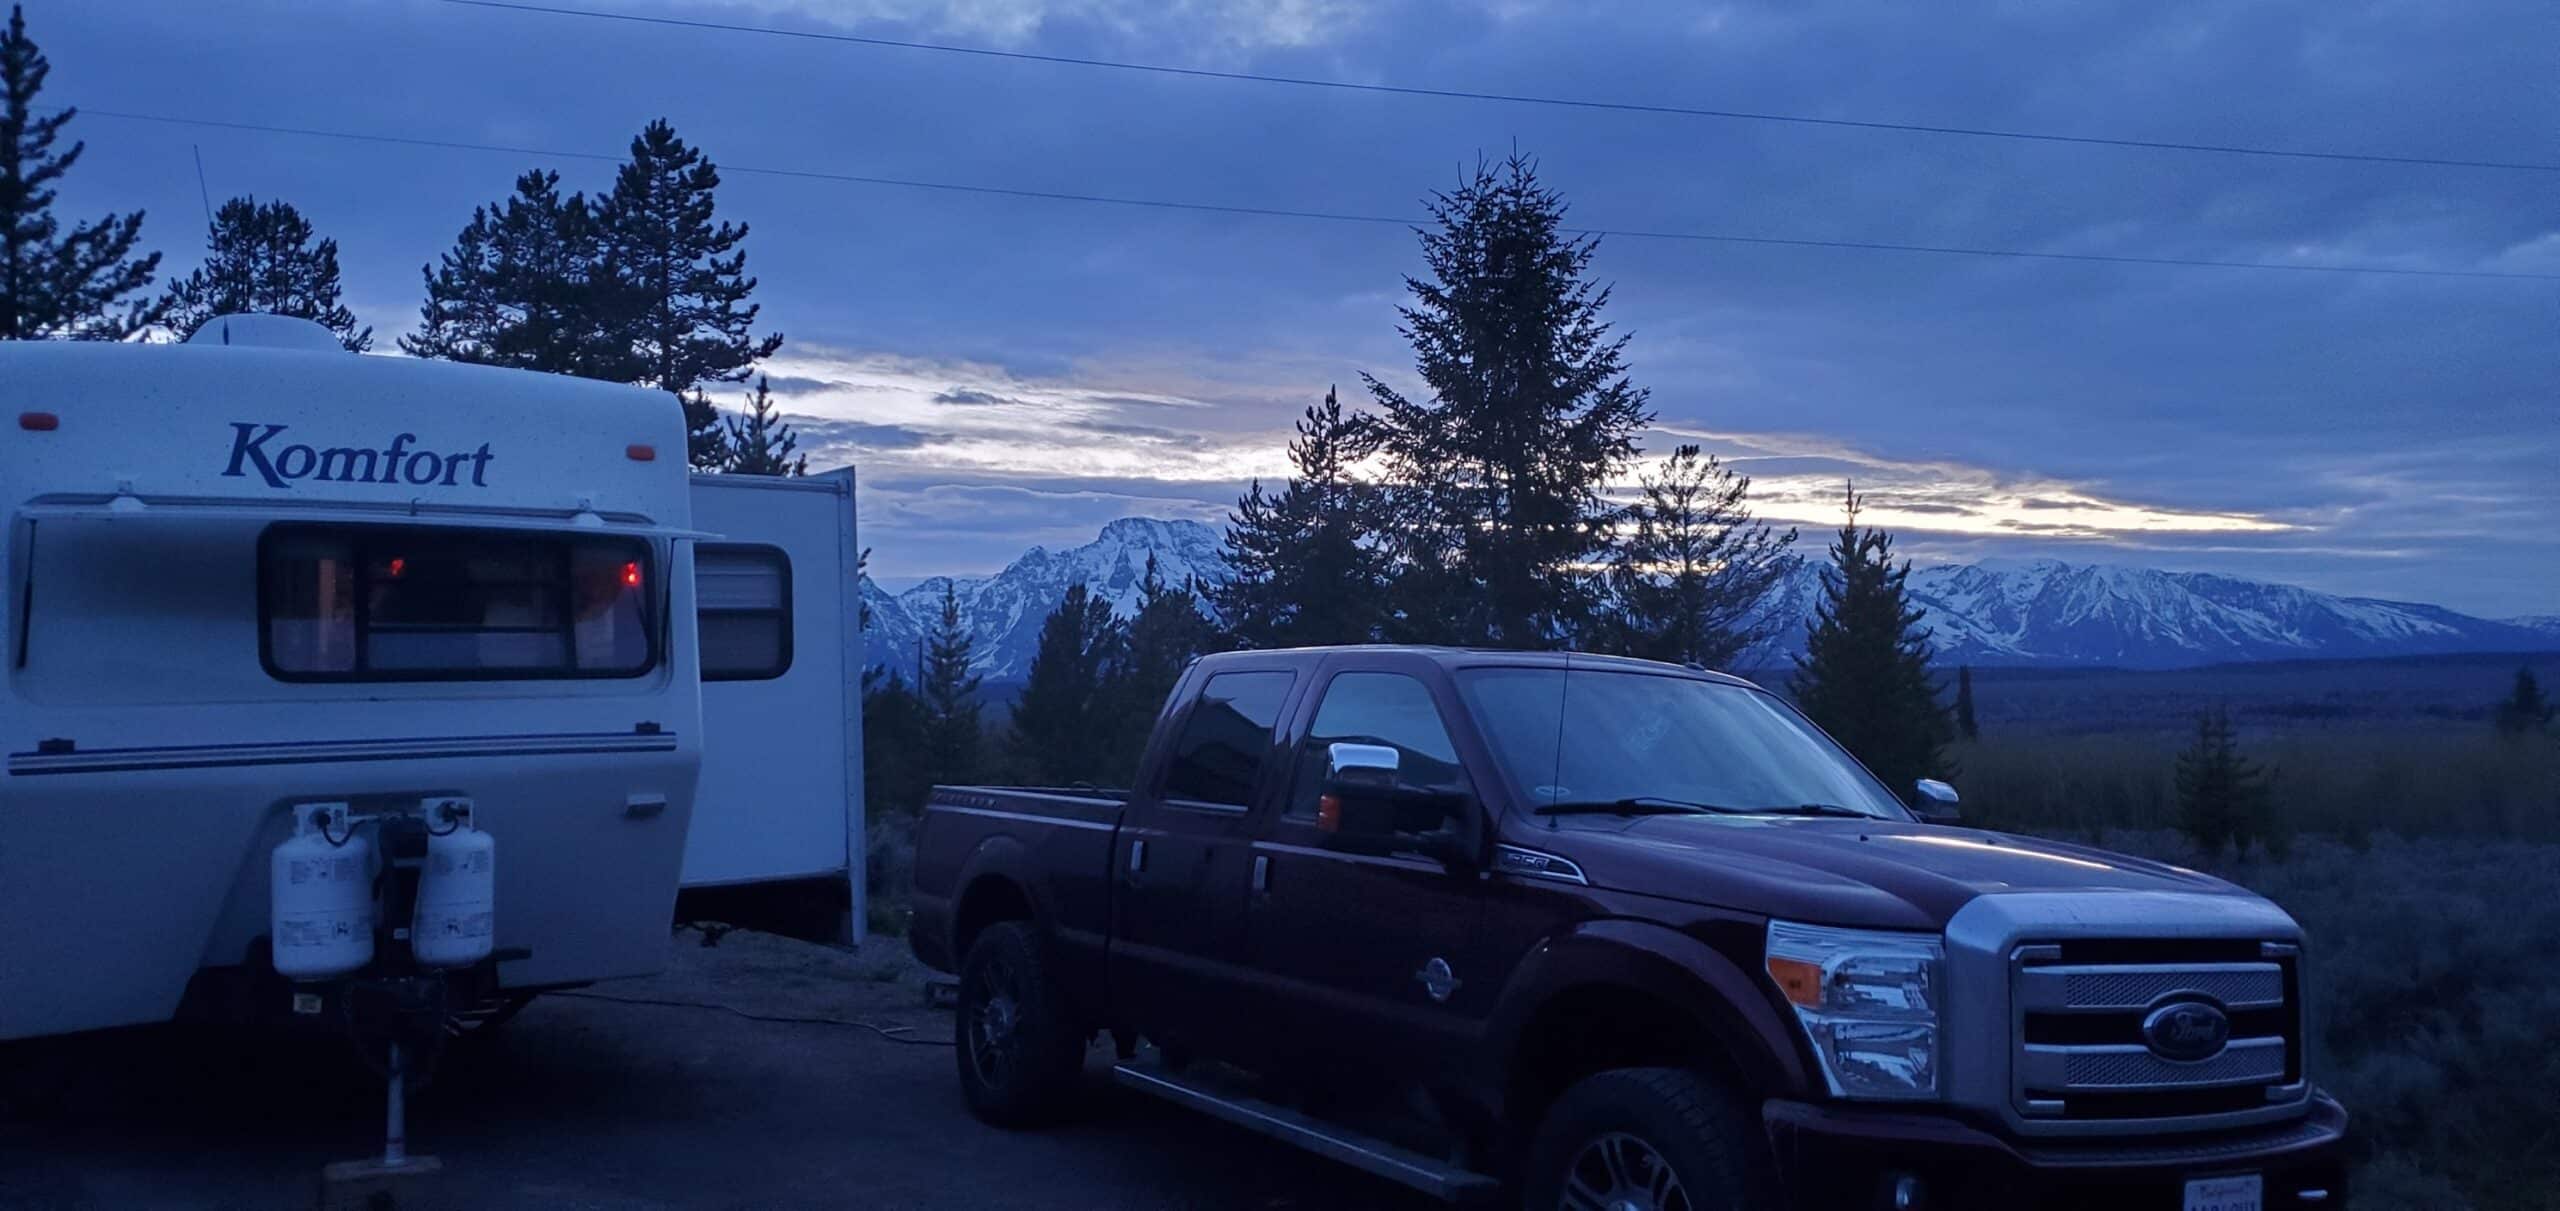 Truck and Trailer parked with snowy mountains in the background